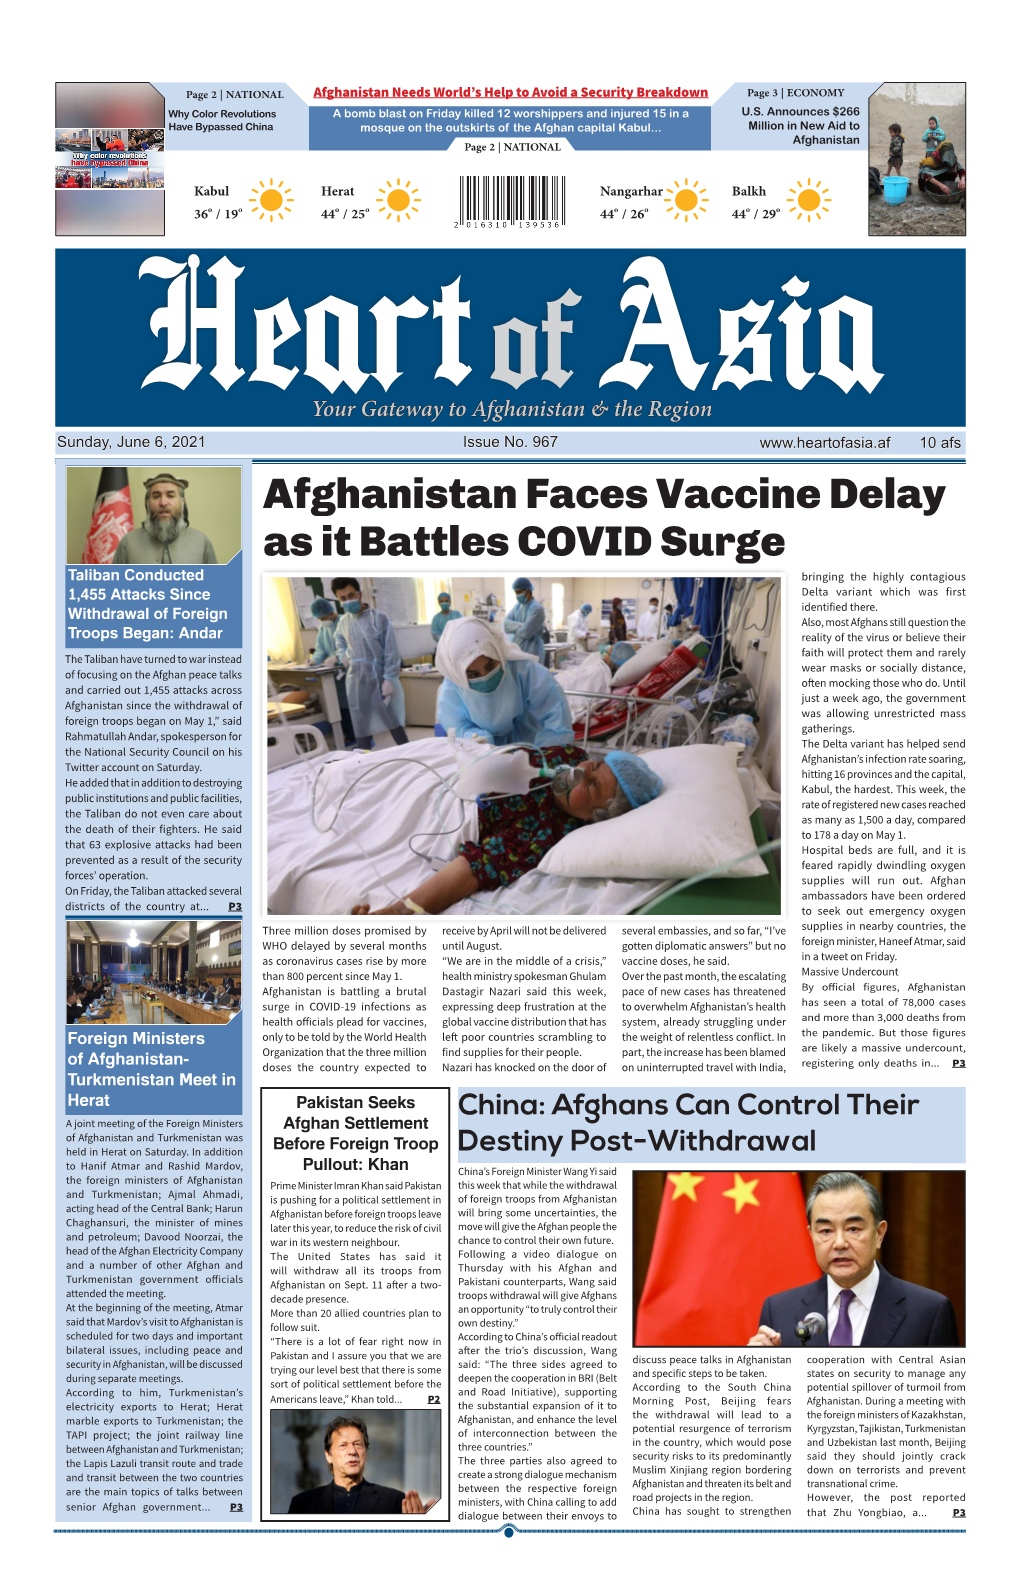 Afghanistan Faces Vaccine Delay As It Battles COVID Surge